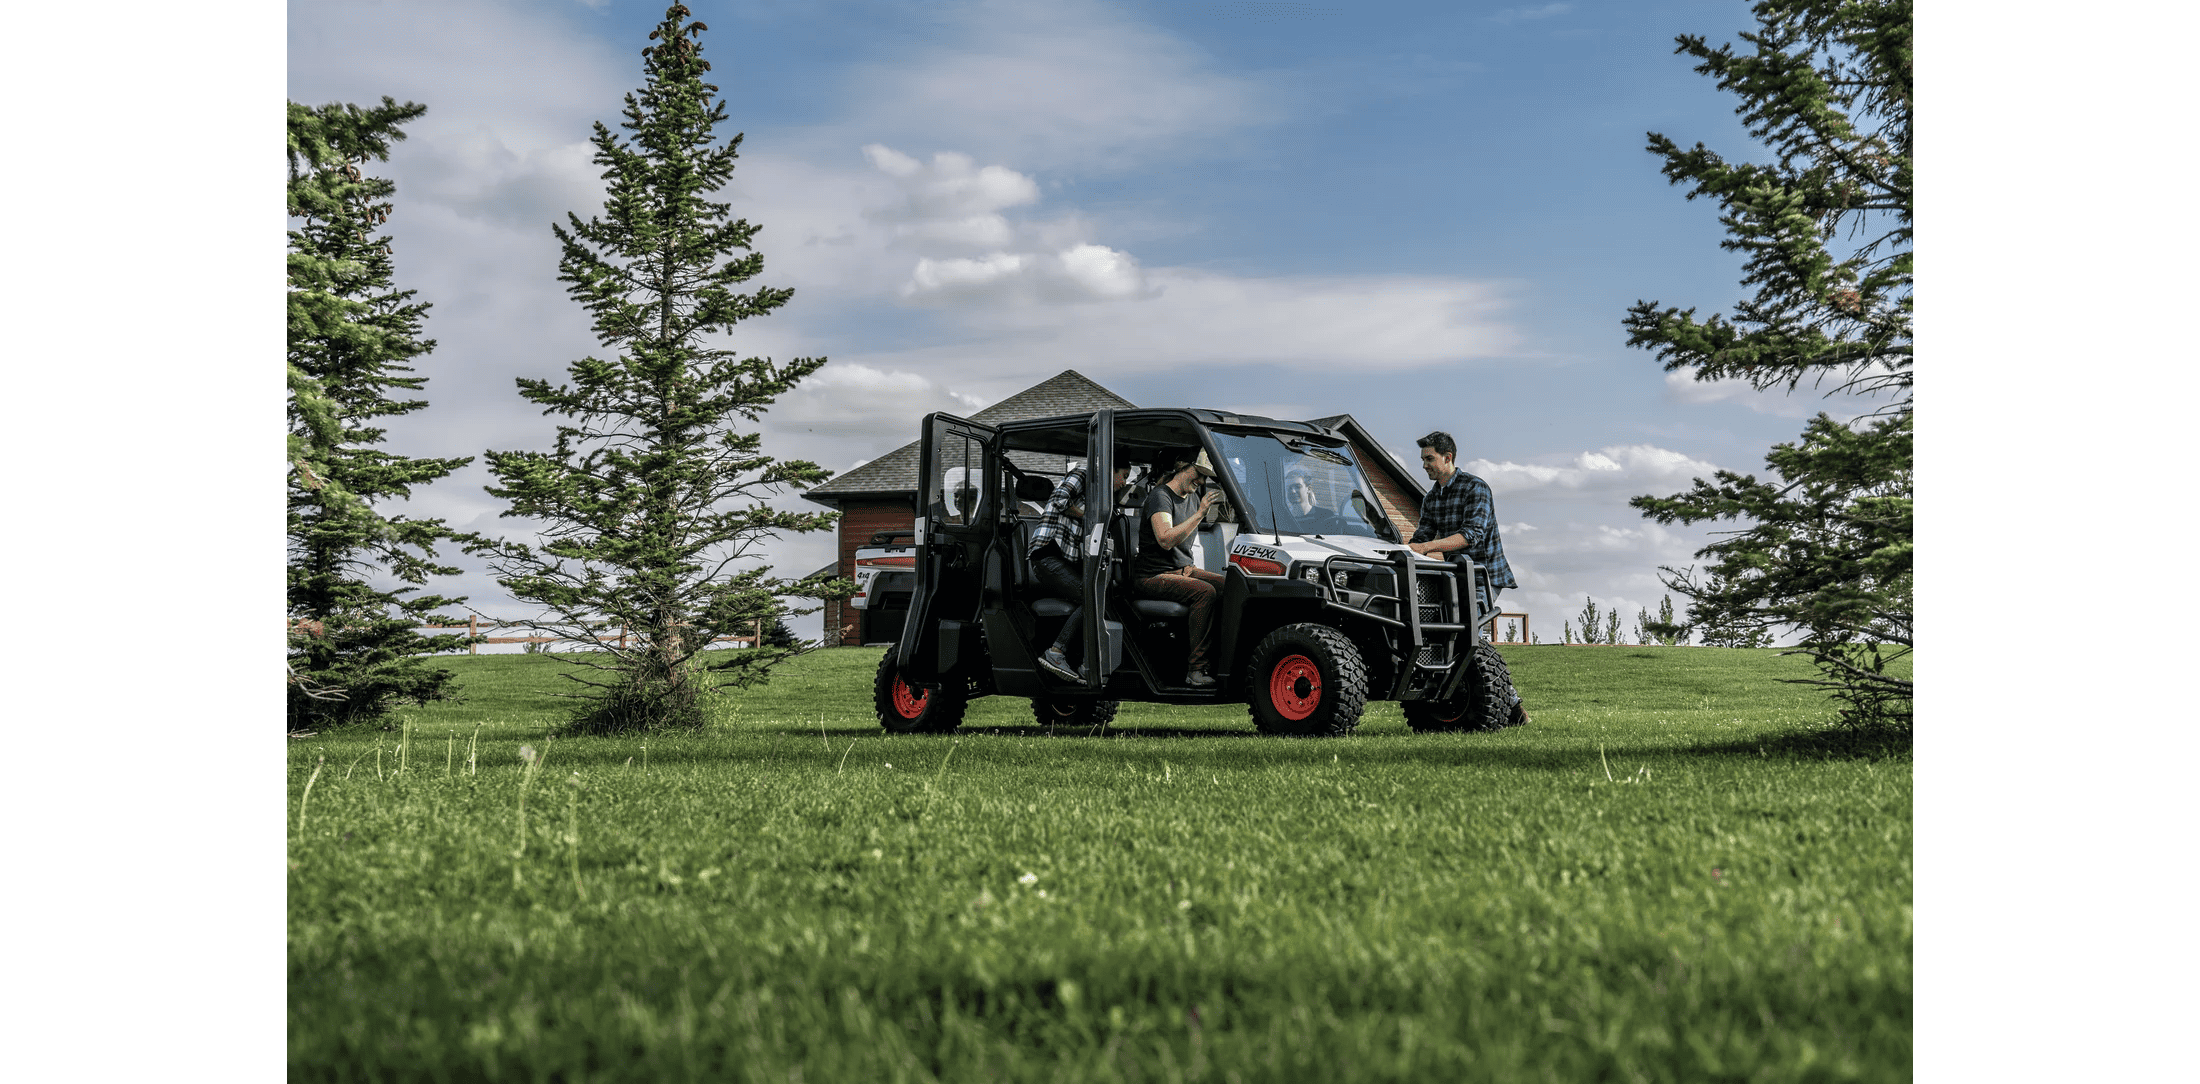 Browse Specs and more for the Bobcat UV34XL (Diesel) Utility Vehicle - Bobcat of the Rockies